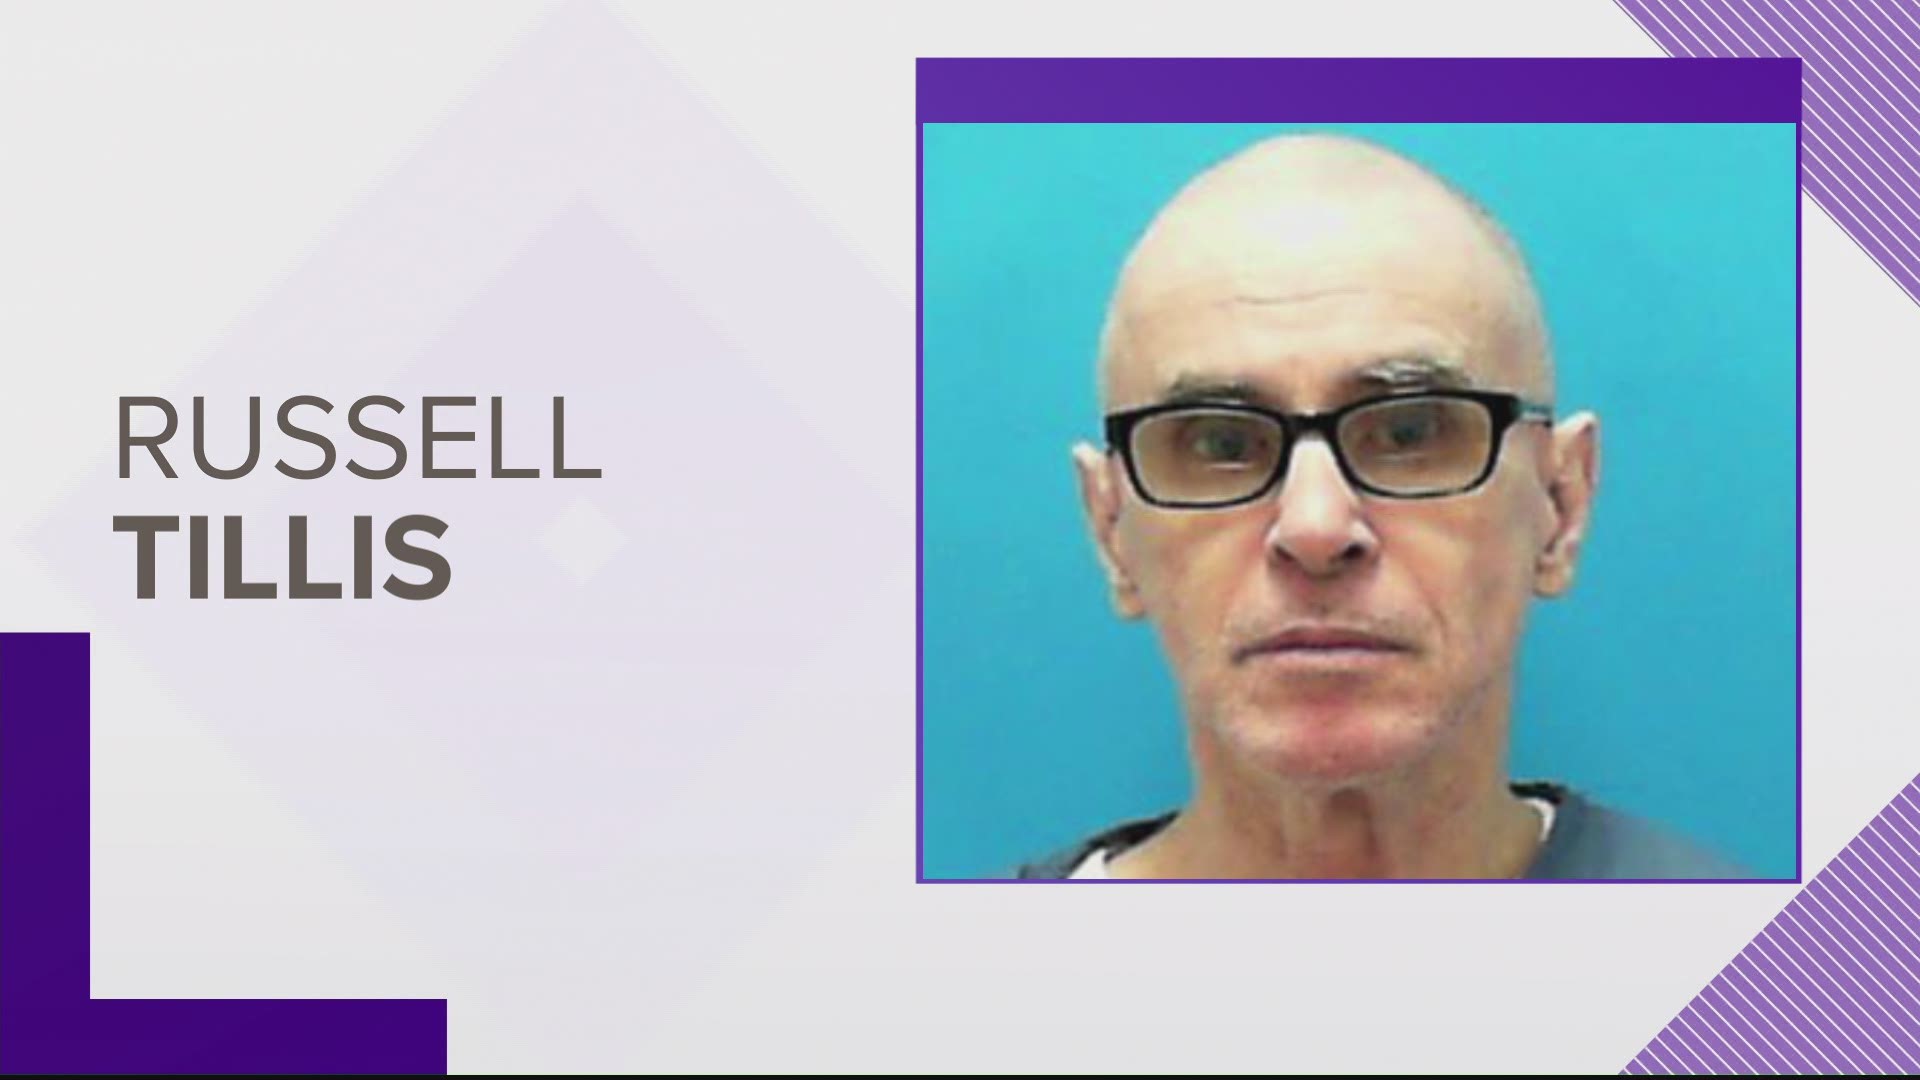 Just days after his request for a new trial was denied, a newly-bald Russell Tillis begins serving life sentence in 'House of Horrors' case.